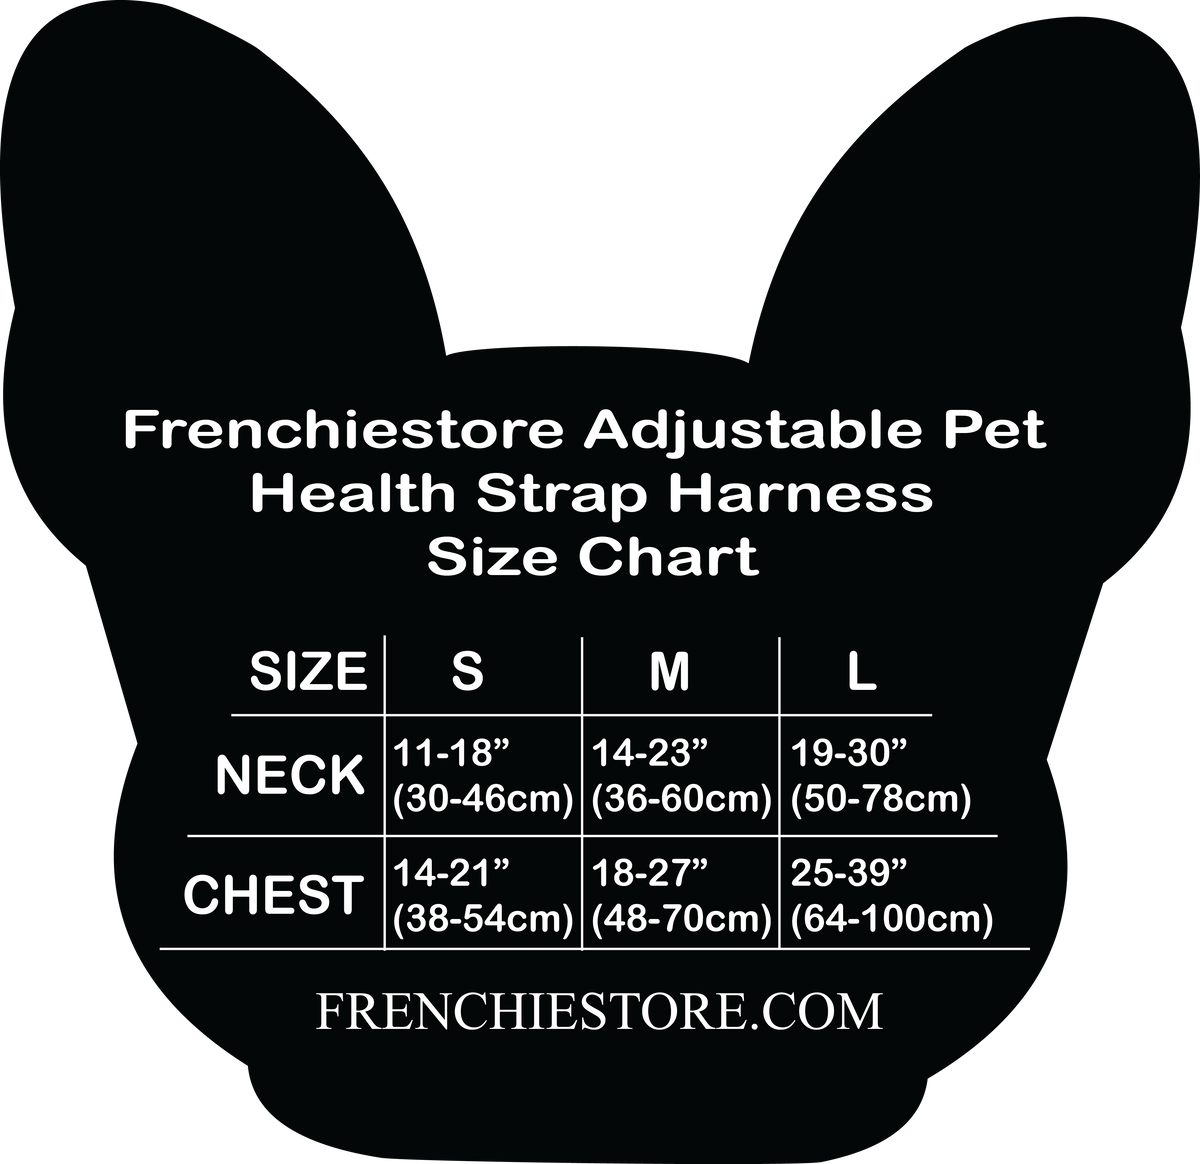 Teal LV x SUPREME harness/collar/leash set – The Frenchie Shop